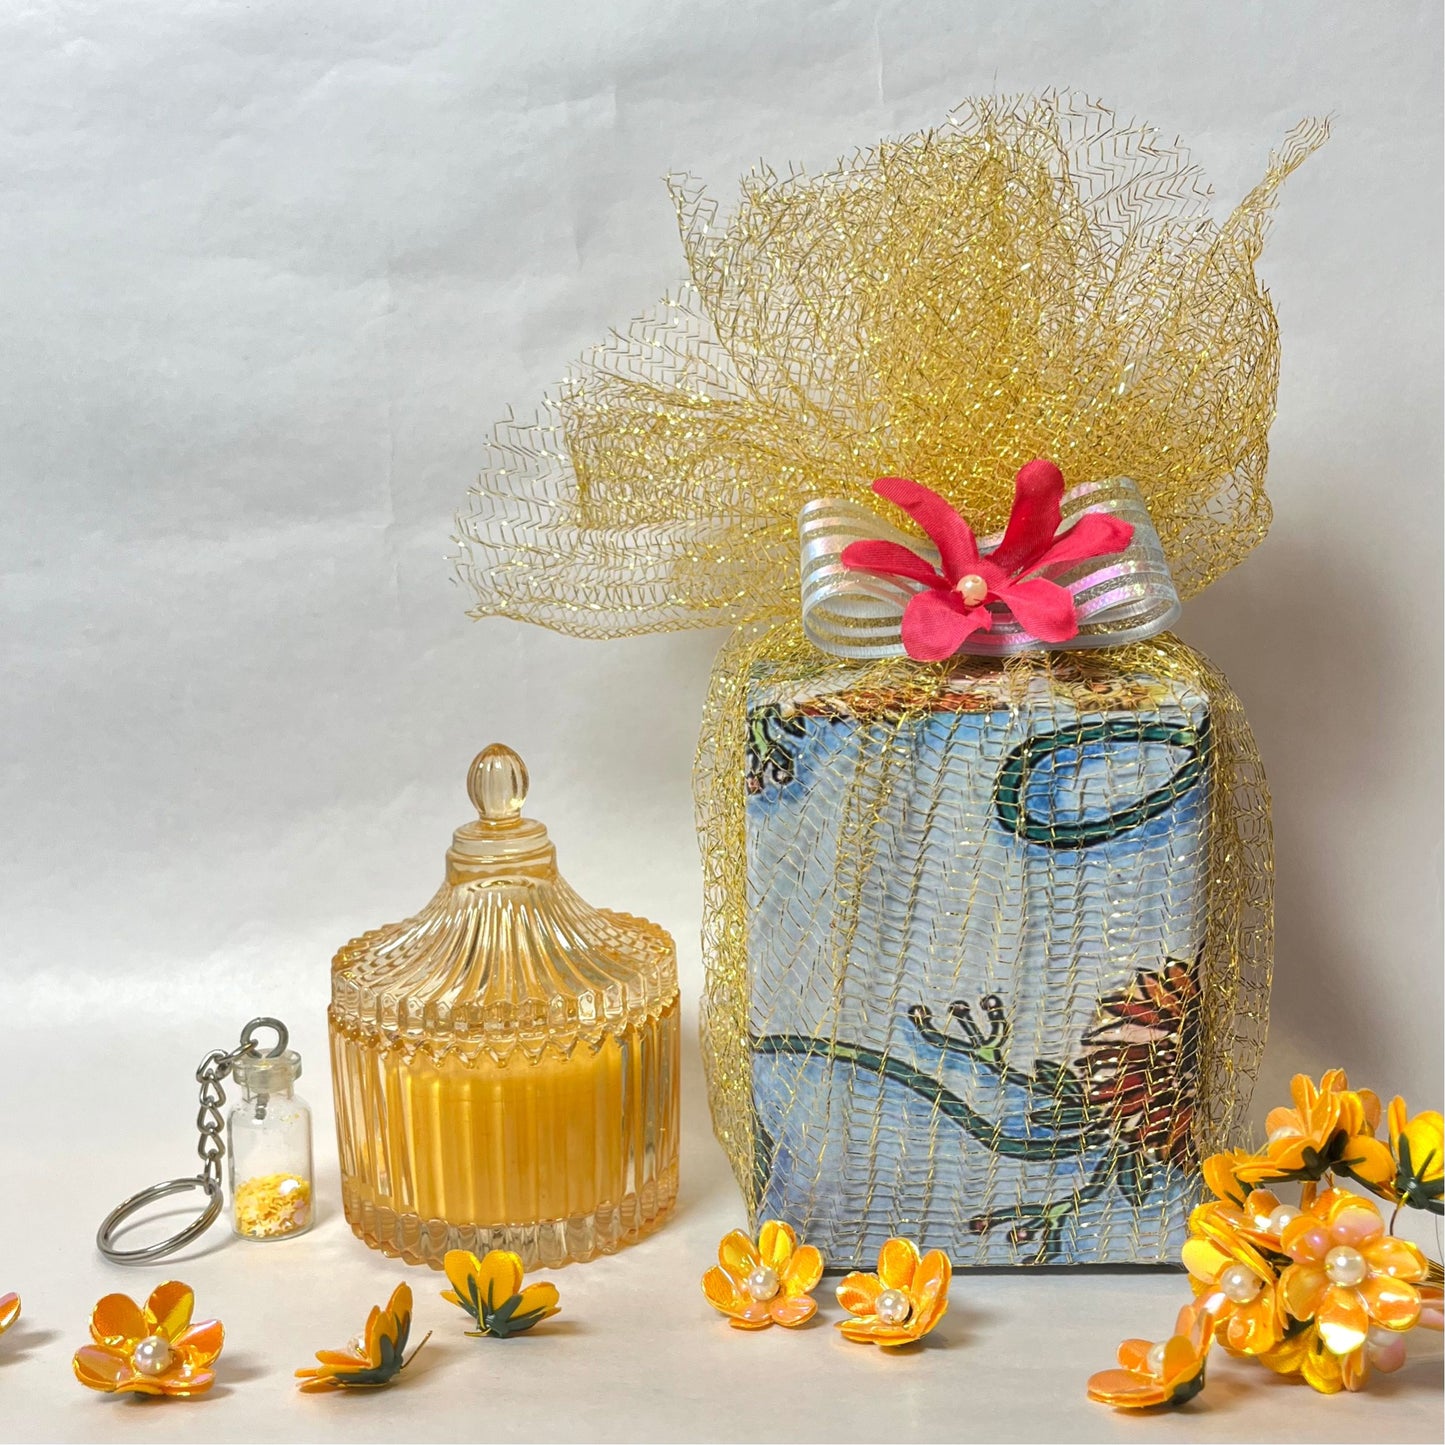 Crystal Candle Gift Set: Golden Scented Candle & Glitter Keychain